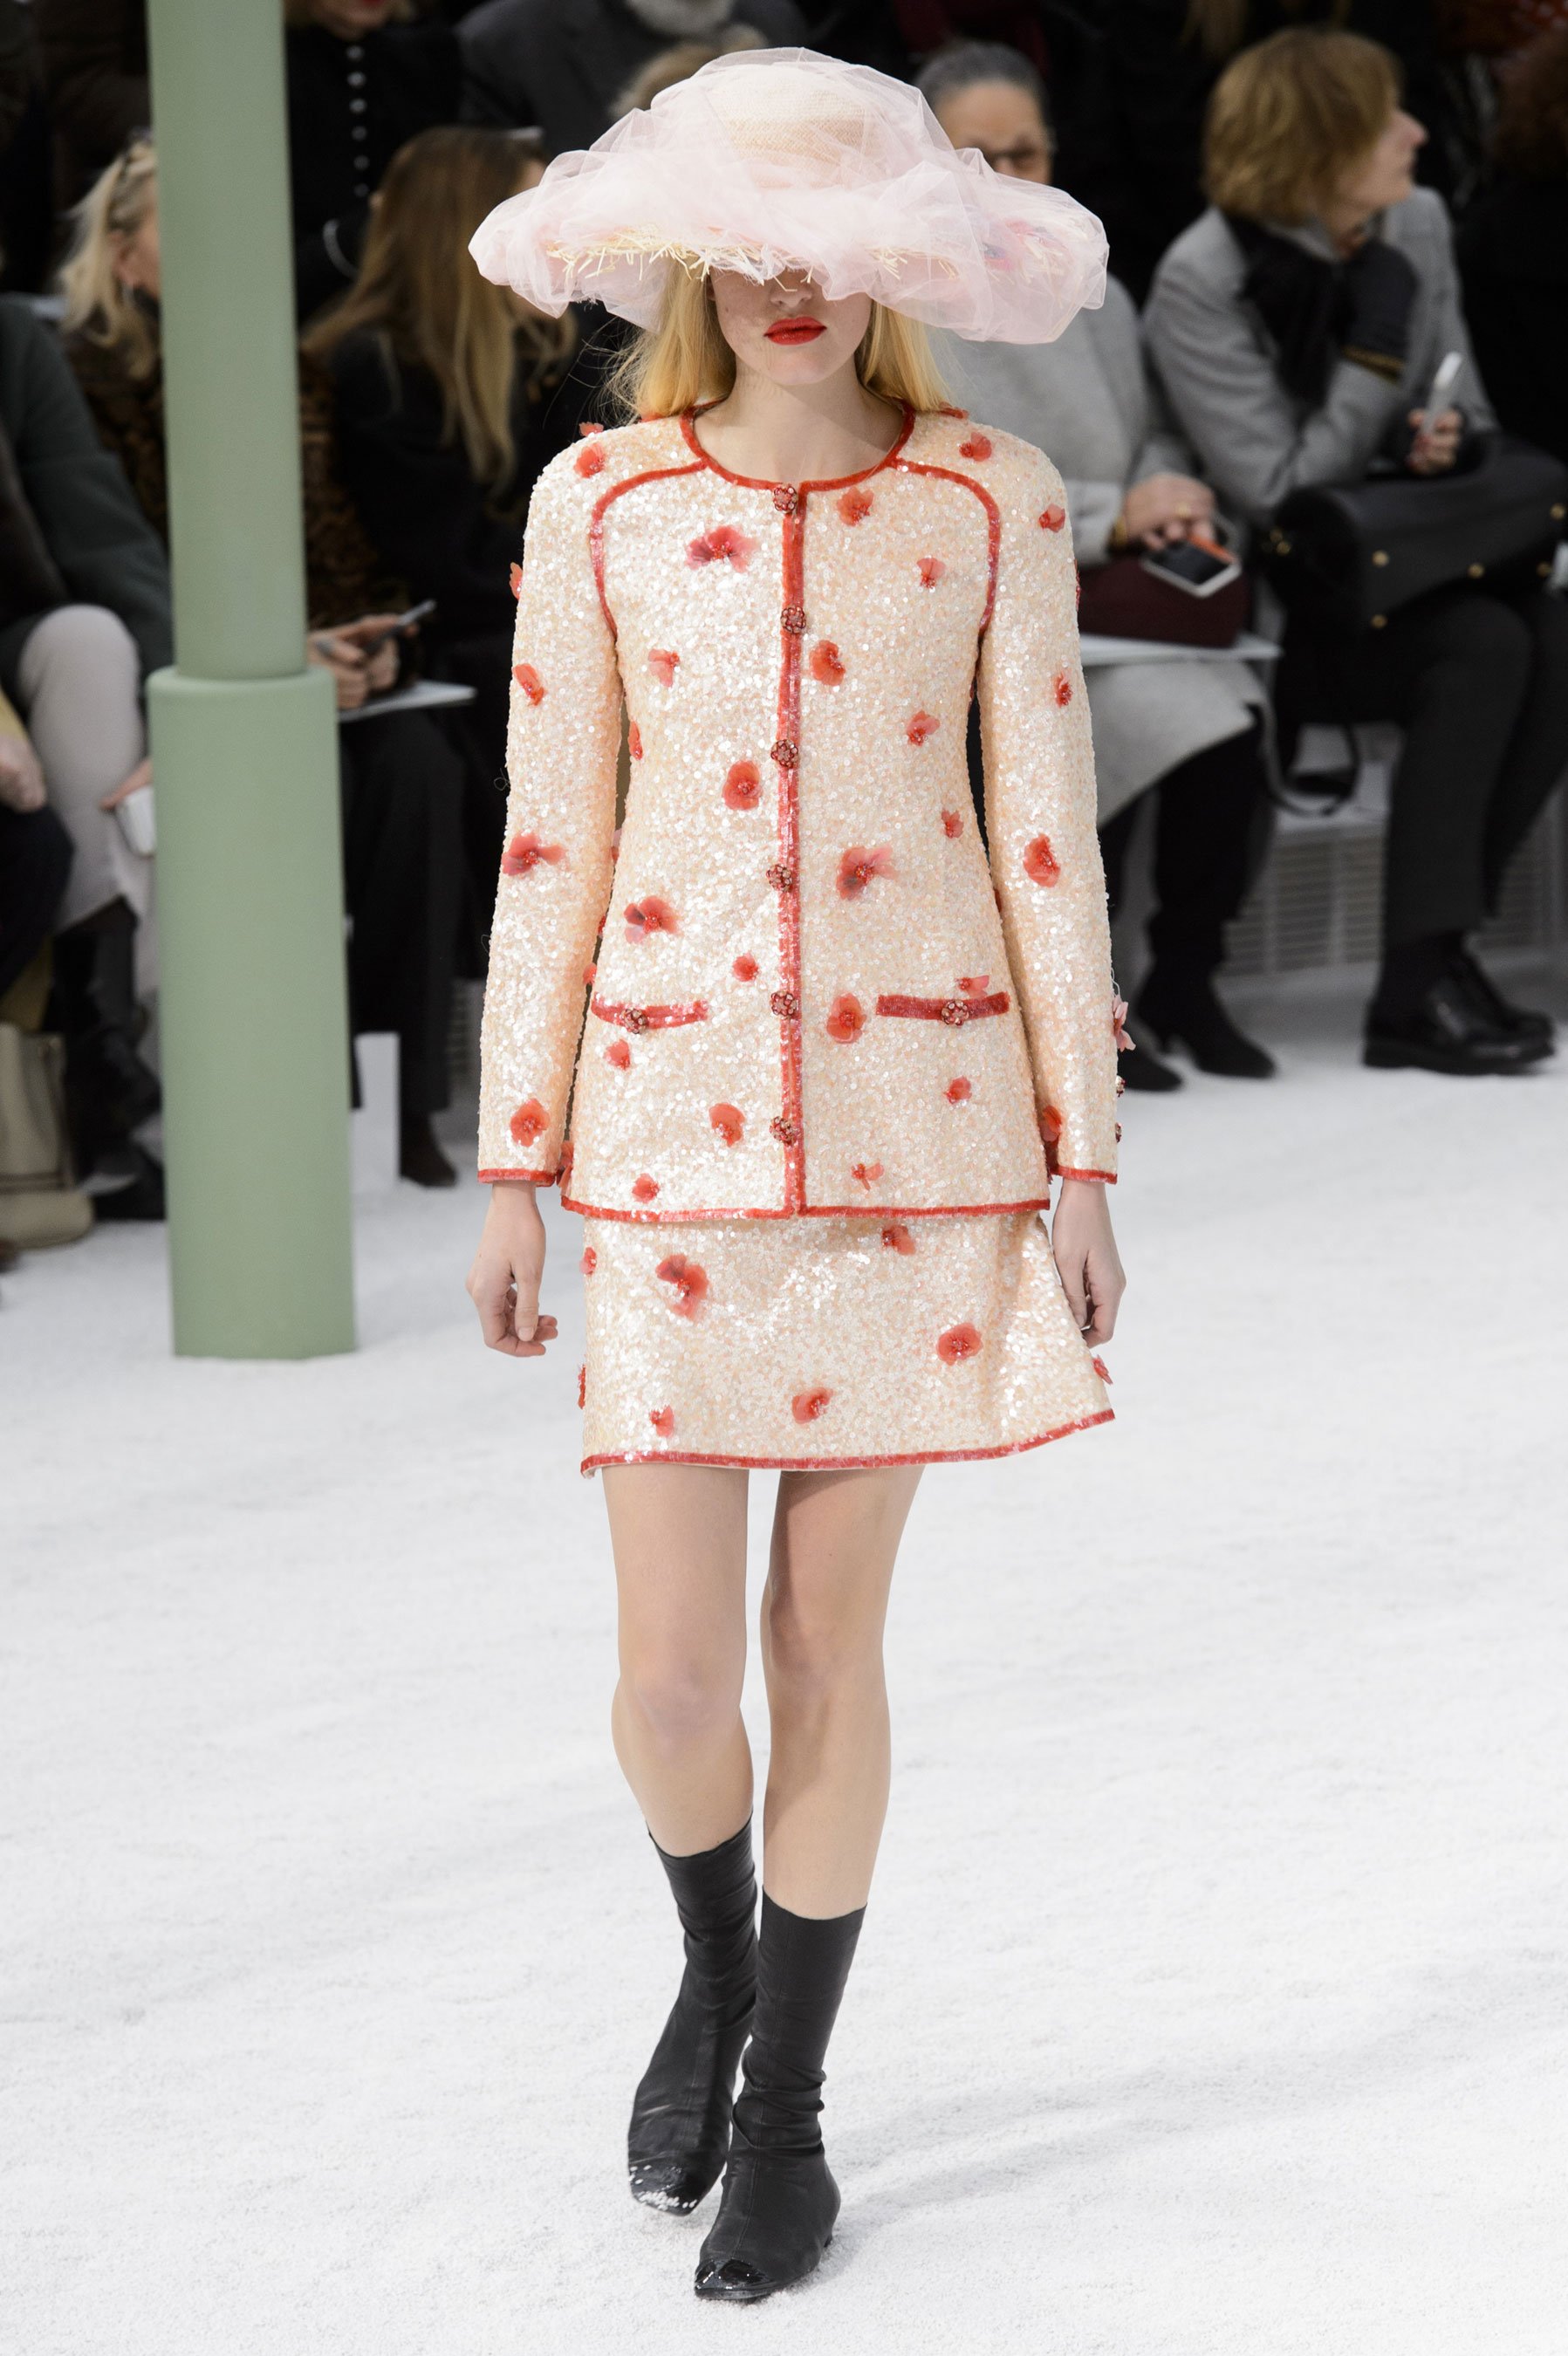 chanel haute couture spring 2015 pfw 30 louise